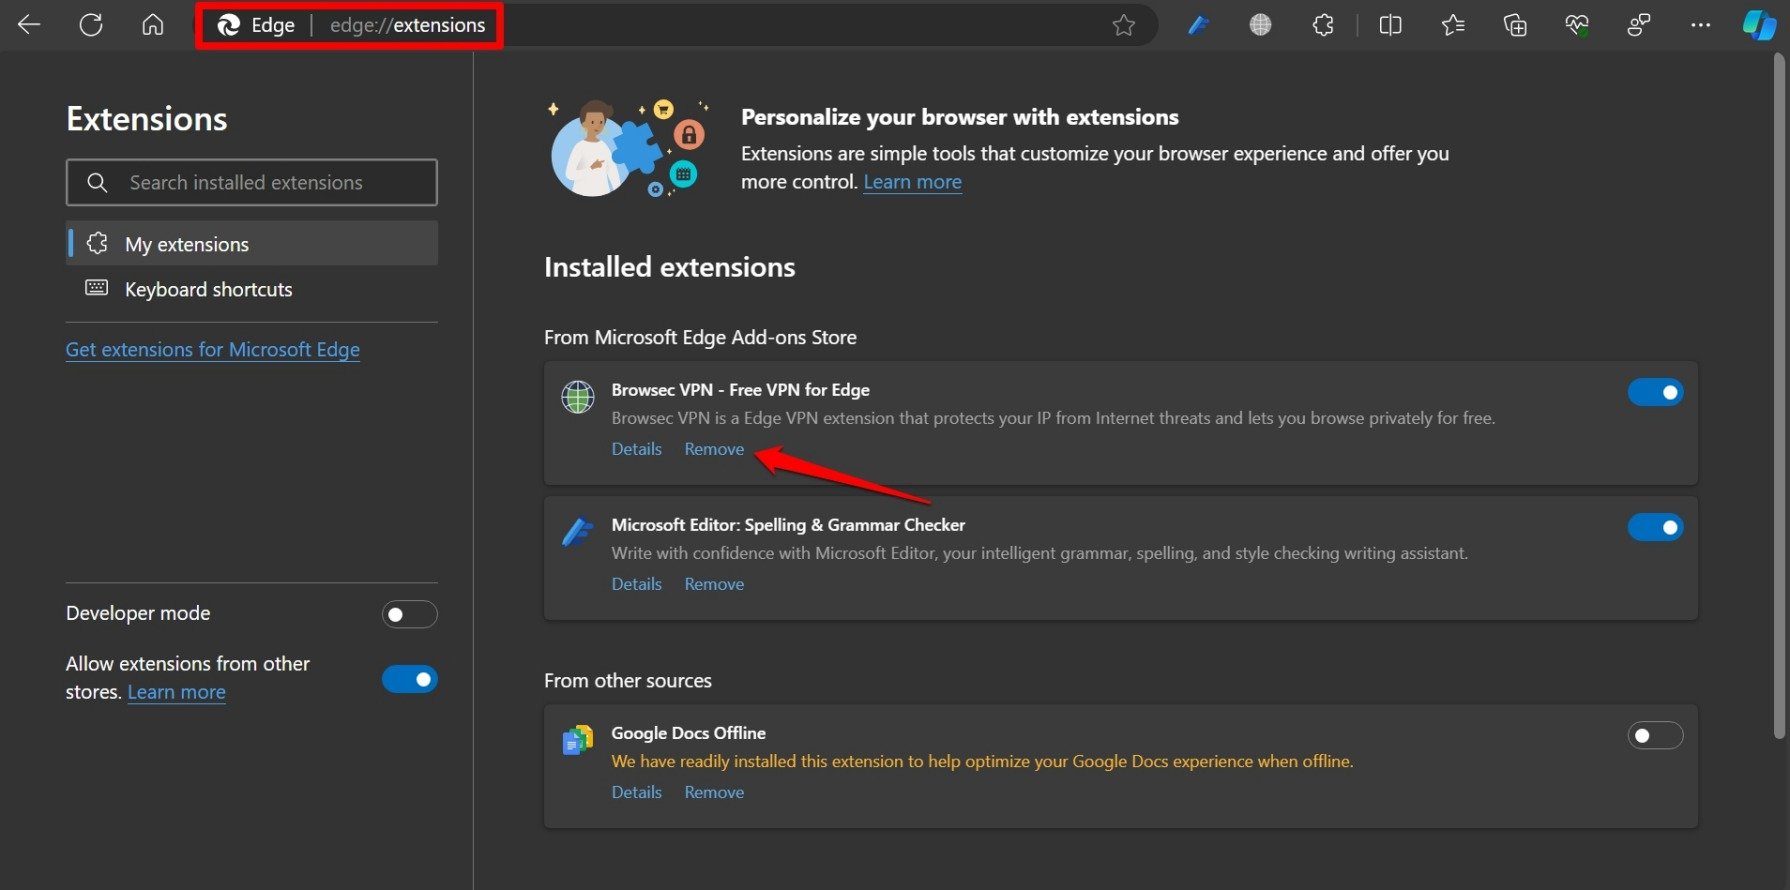 remove extensions in Edge browser